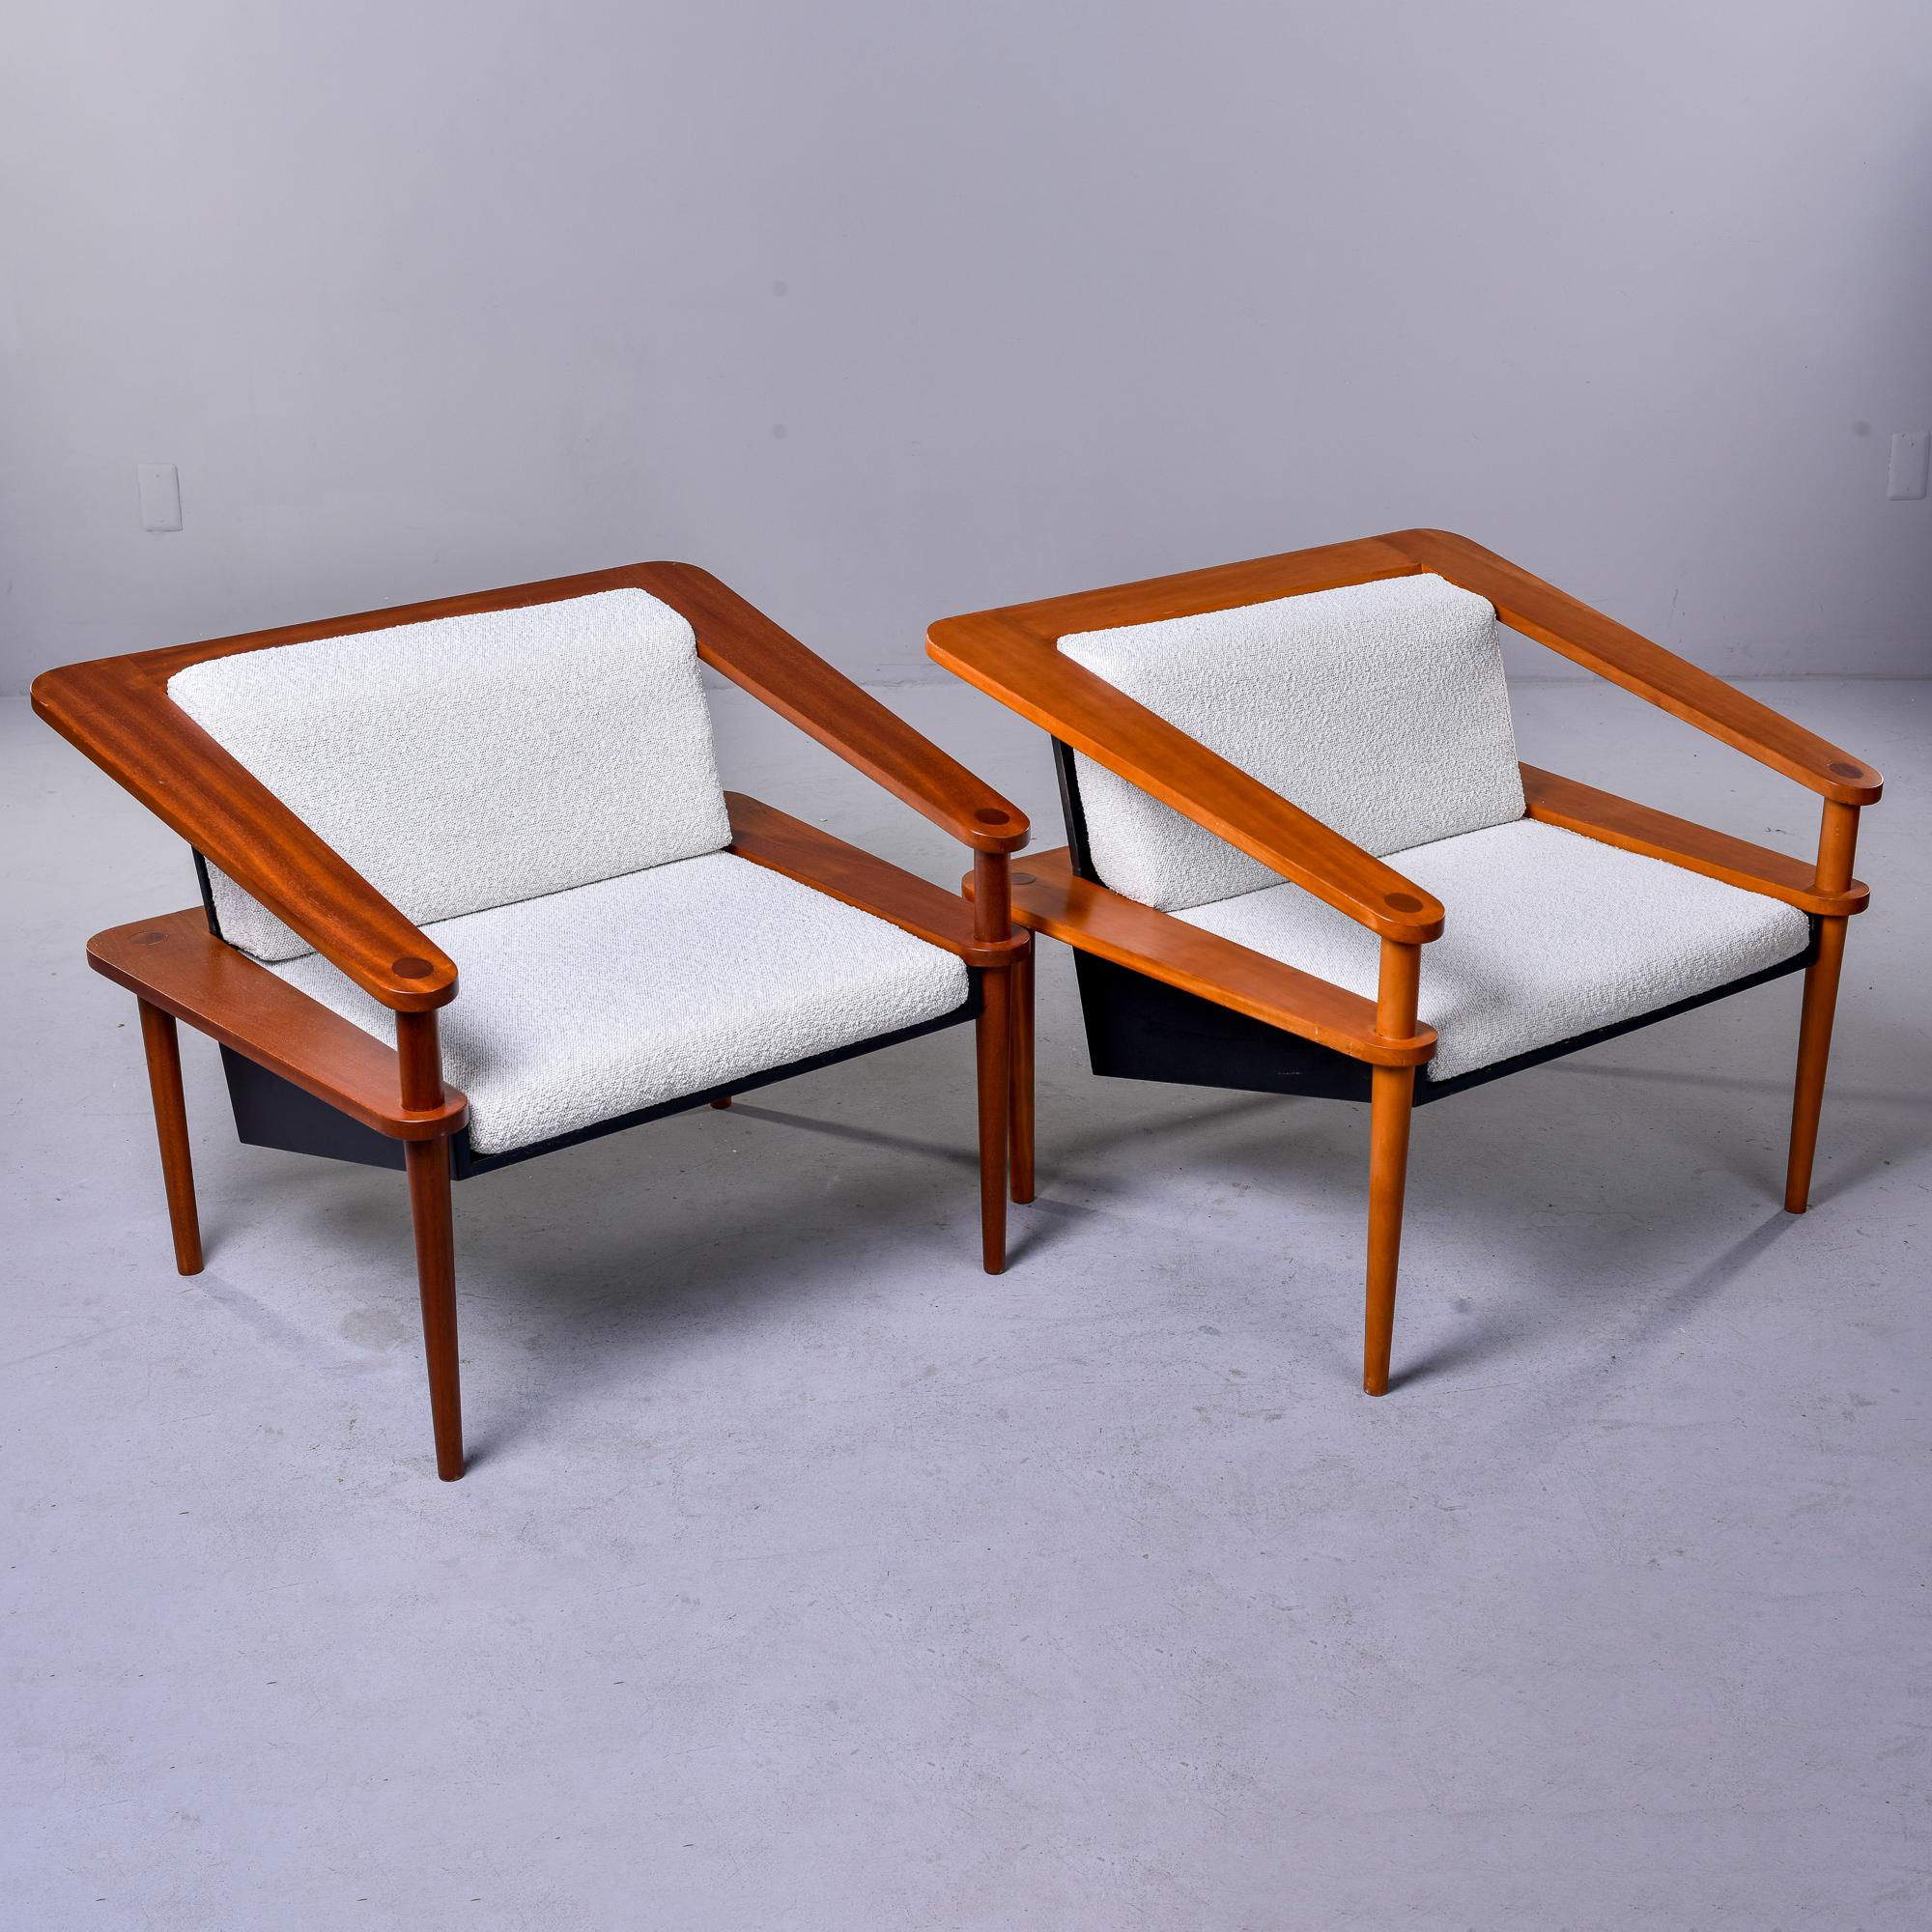 Found in Italy, this pair of circa 1980s teak framed open cube-style chairs have a great sculptural quality. Chair seats angle back and show off the open work sides, tapered legs and flat arms and back rests. We found the chairs upholstered as shown